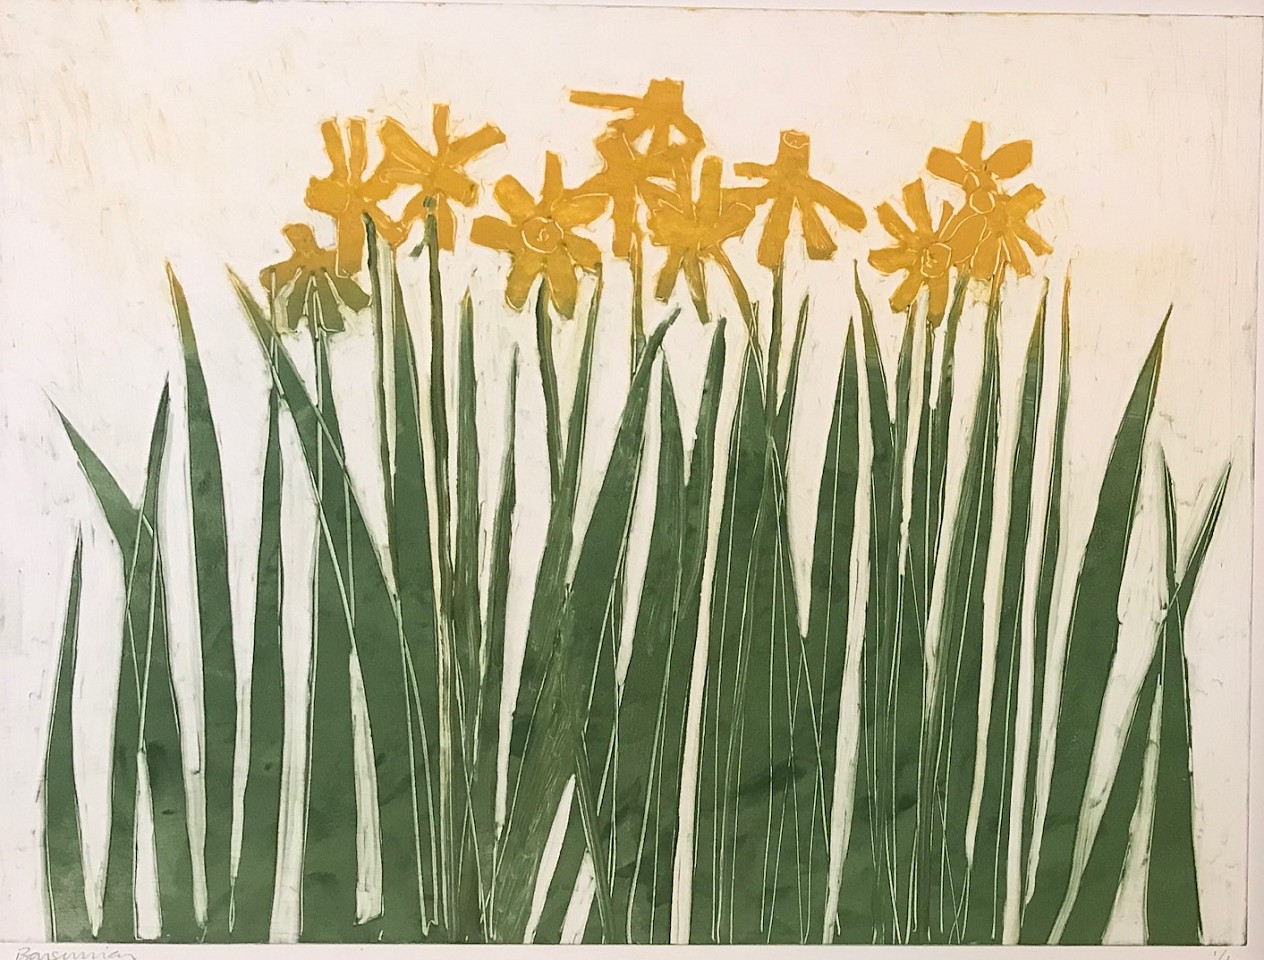 Lisa Barsumian, Yellow Daffodils
colored monotype, 20"" x 25""
signed lower left
LB 1119.07
$1,100